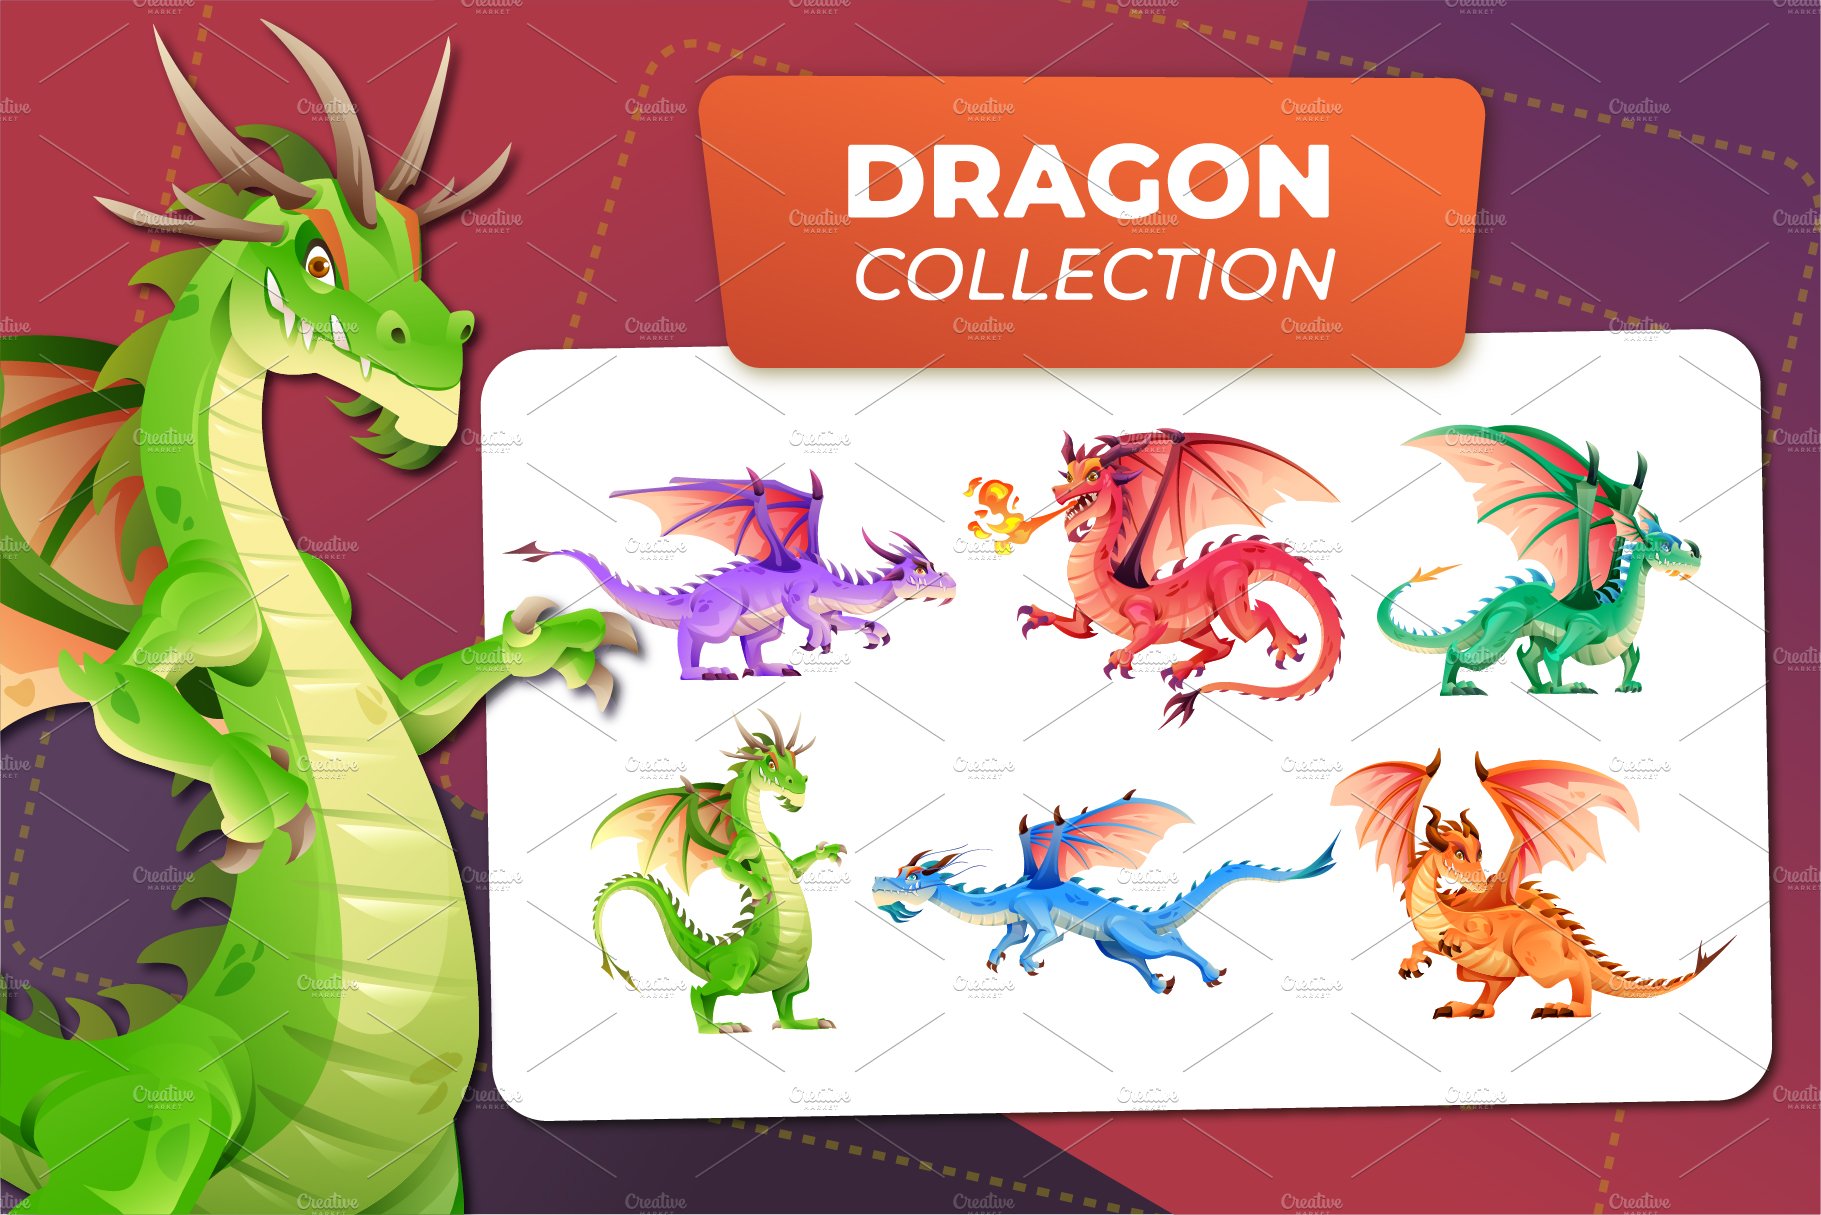 Dragon Collection cover image.